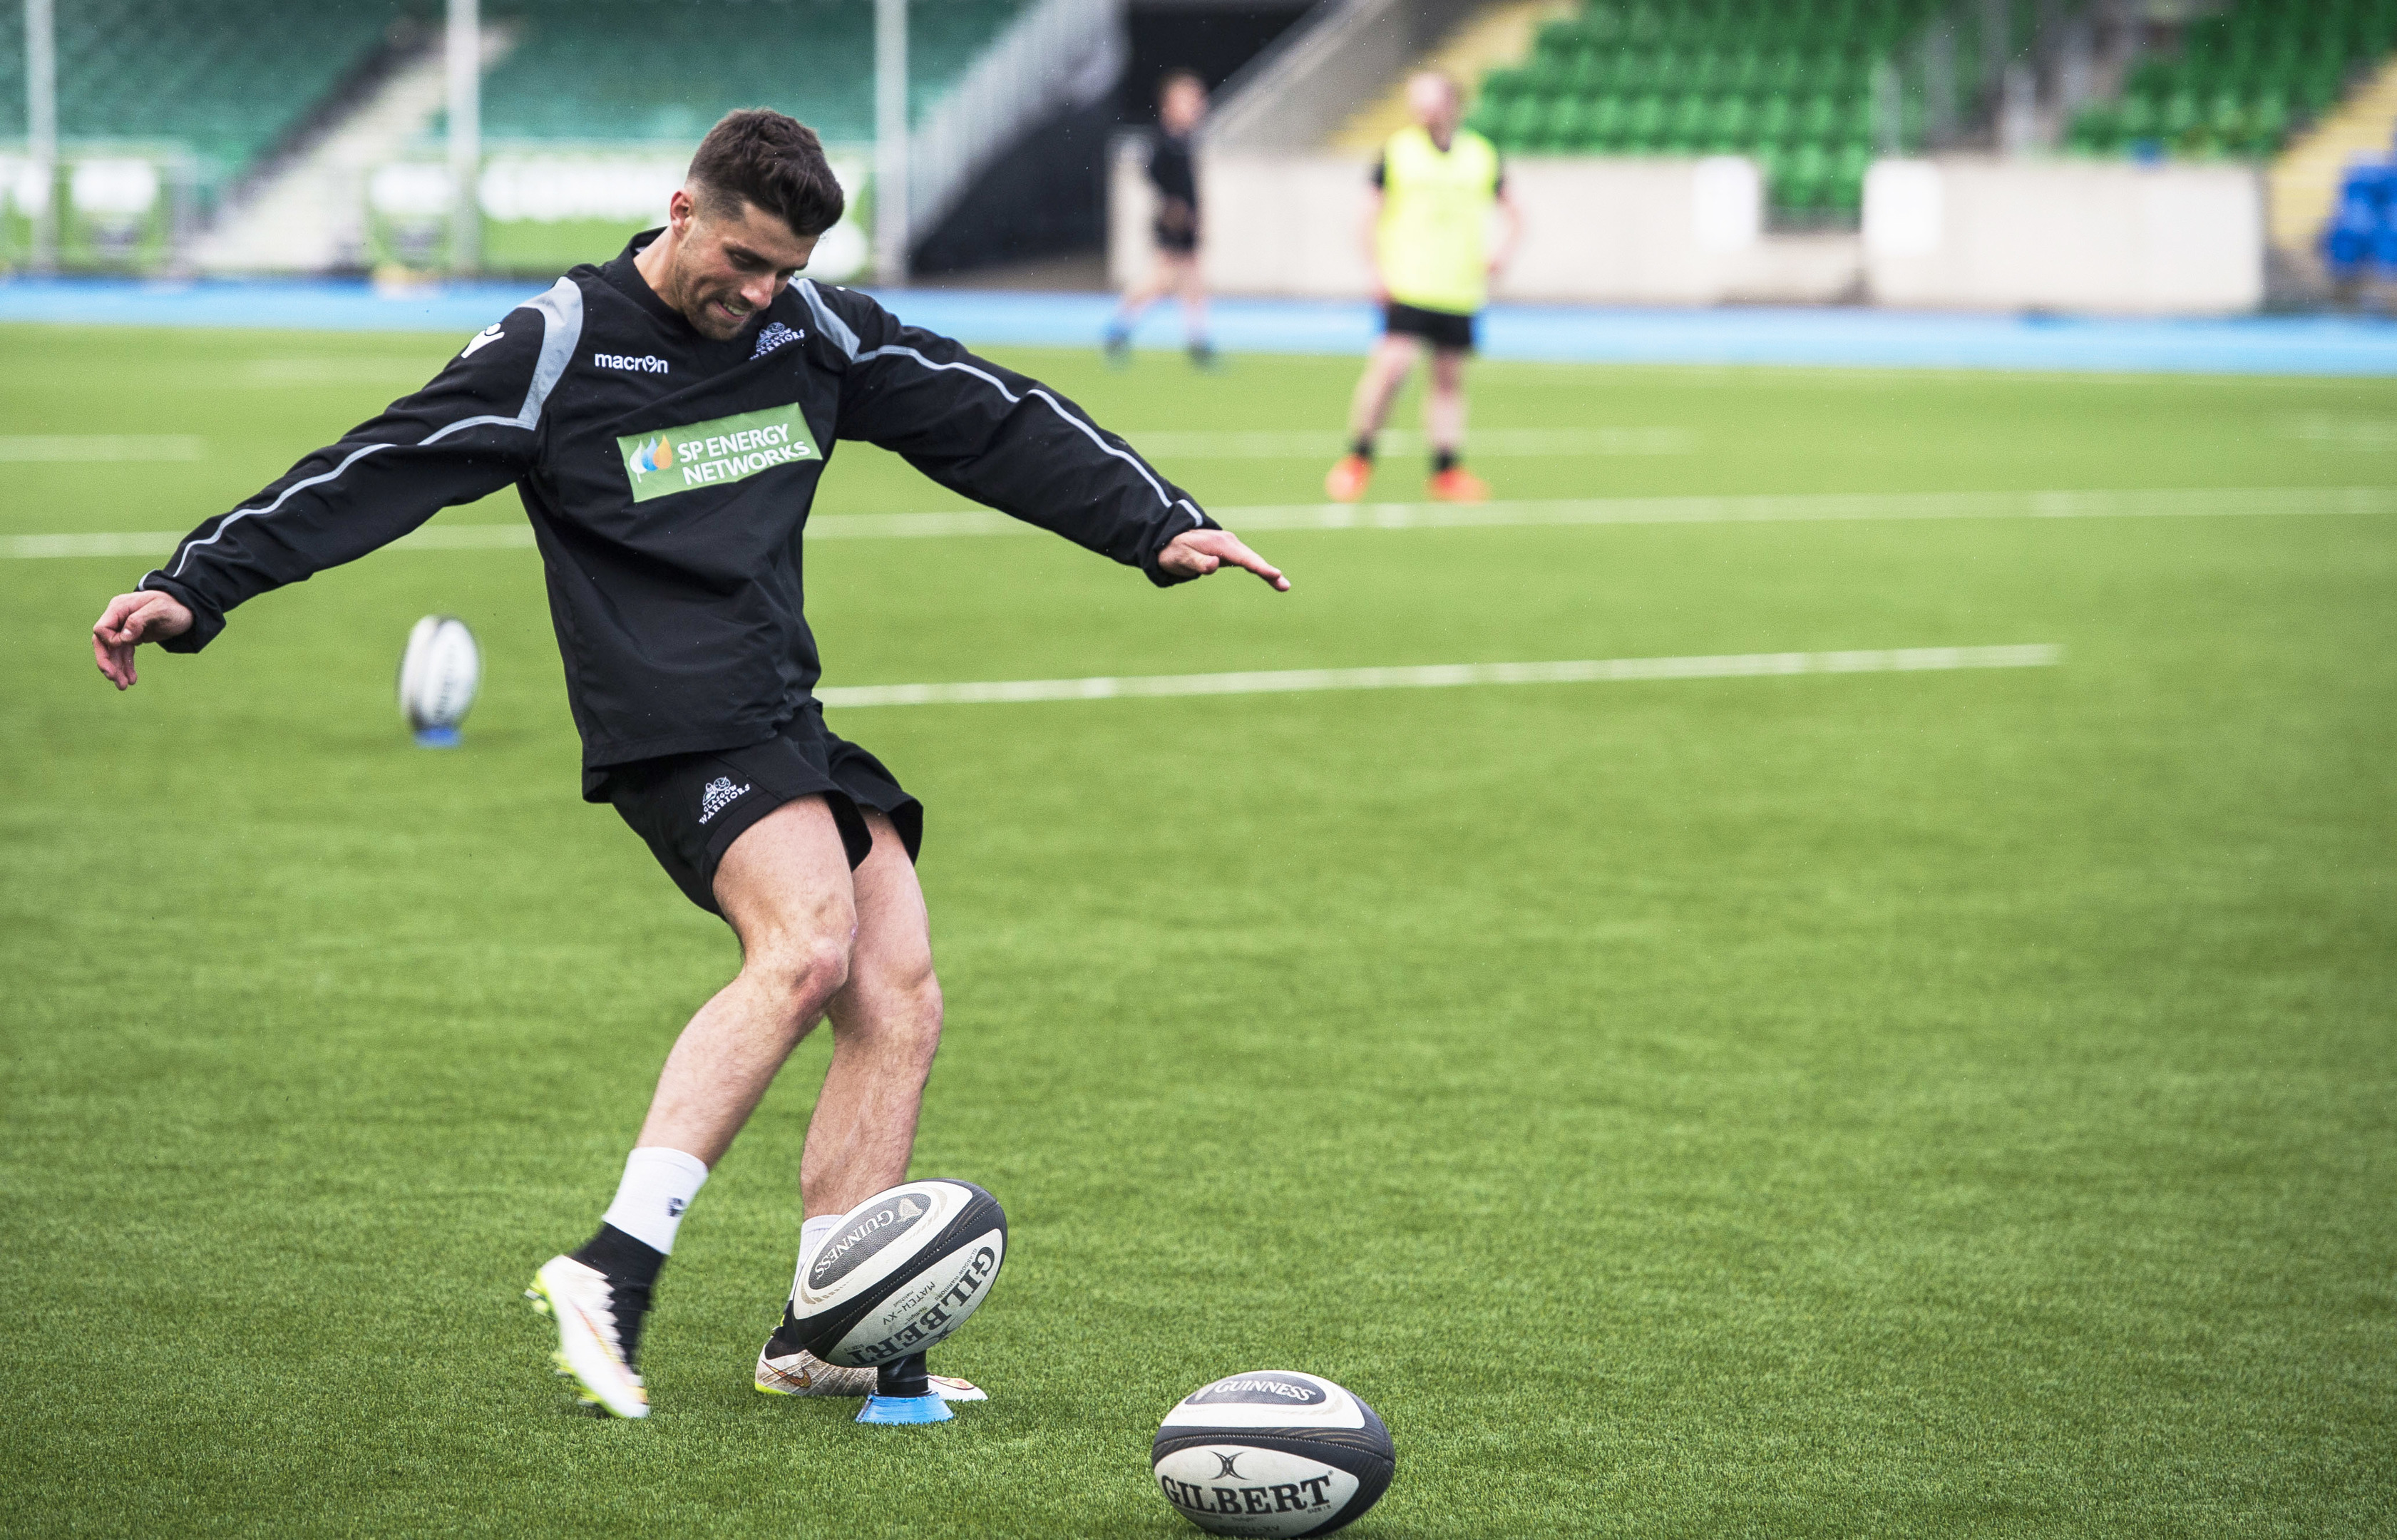 Adam Hastings has been encouraged to try his hand from deep by Dave Rennie.